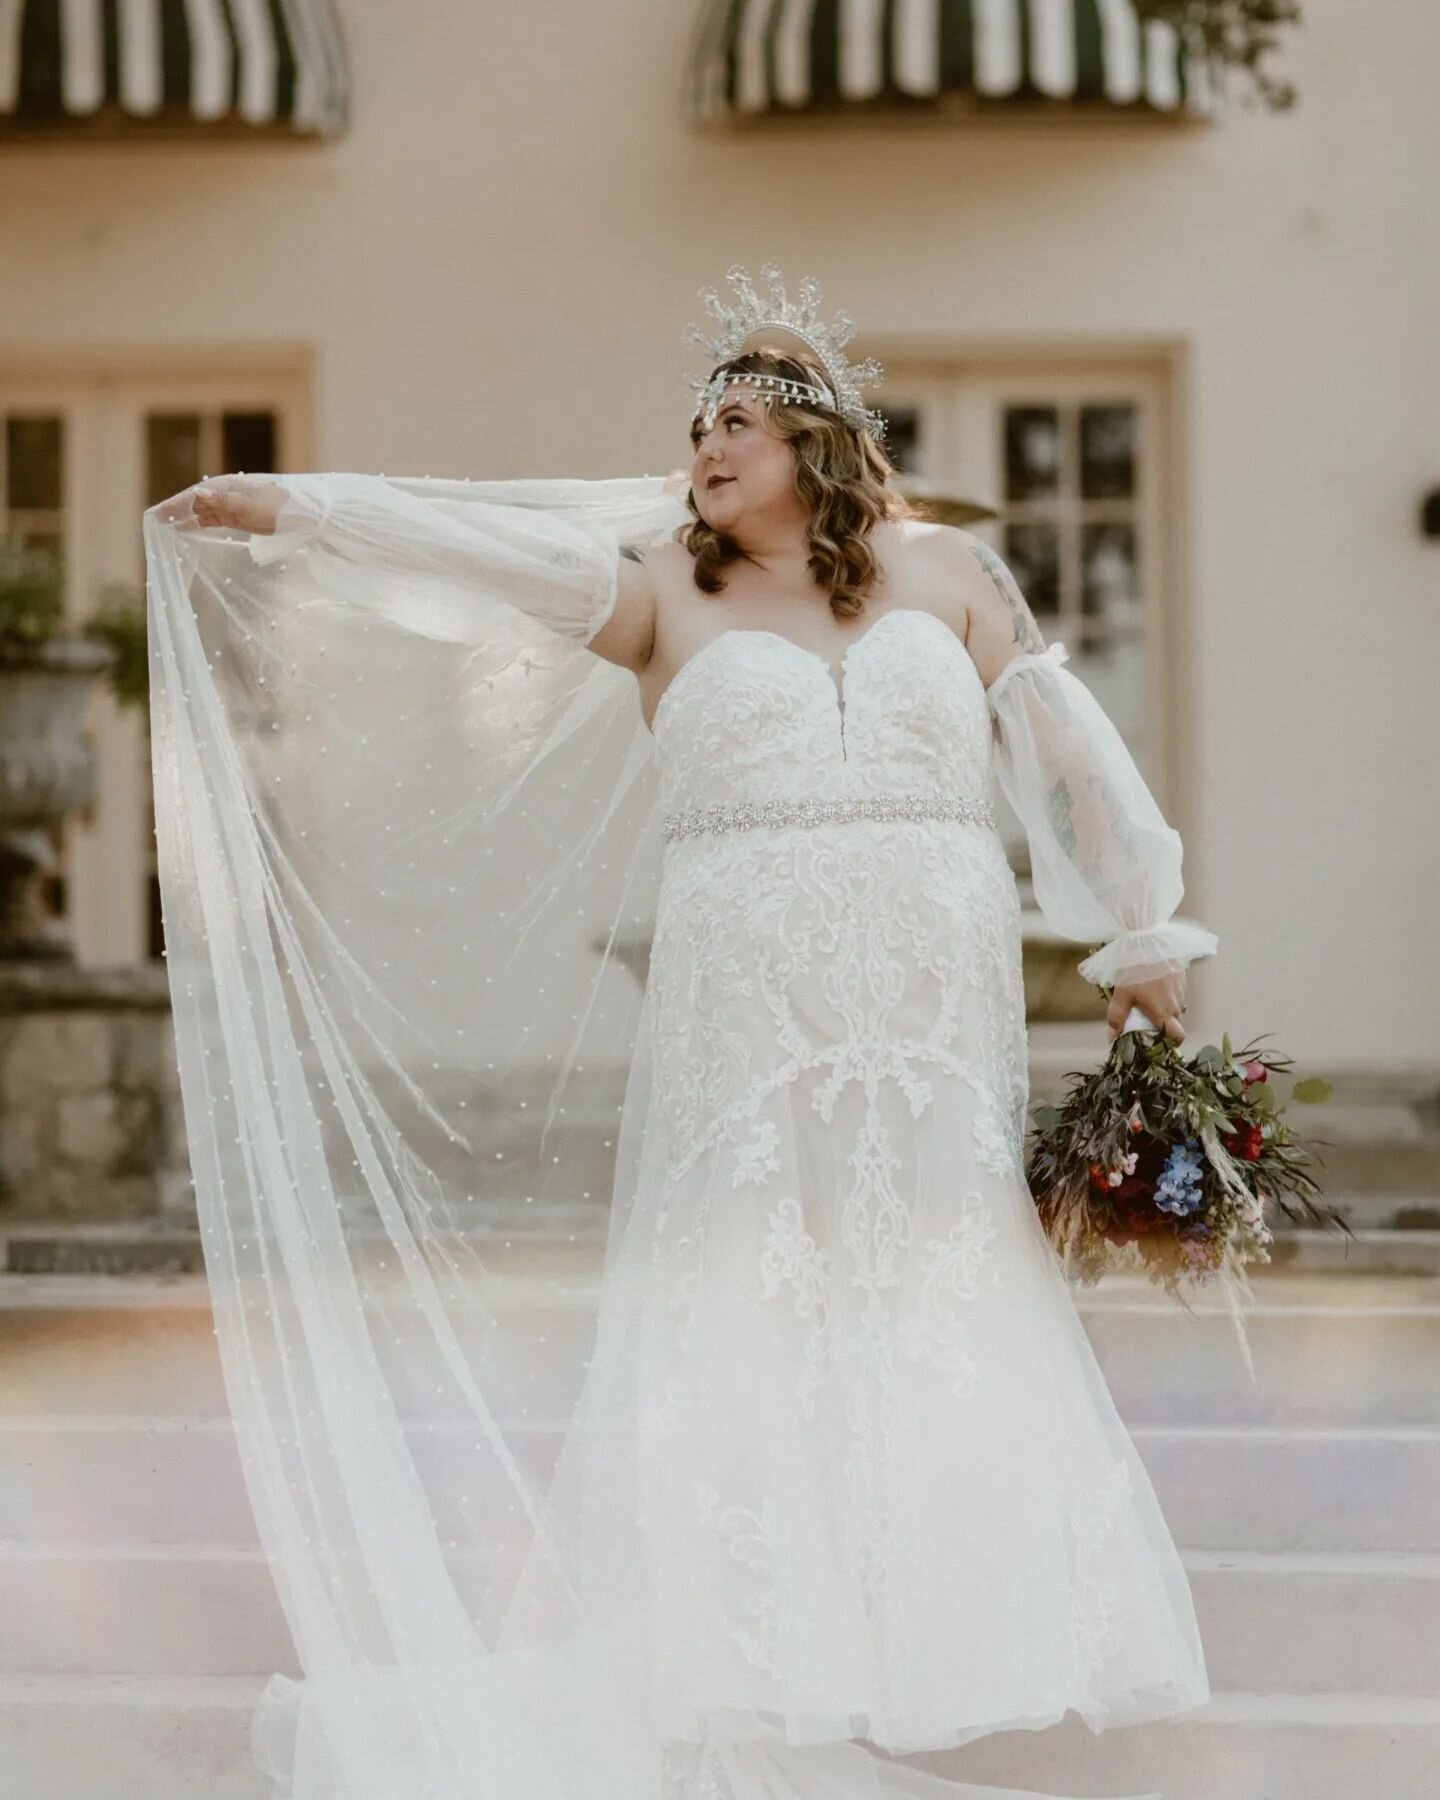 This woman became a TAYLOR this weekend! 😍 Which means I can finally share some of her bridals! Ahhh! Holly (and let's be honest, this crown) deserve every single ounce of the spotlight. What an incredibly beautiful woman inside and out. It is my im